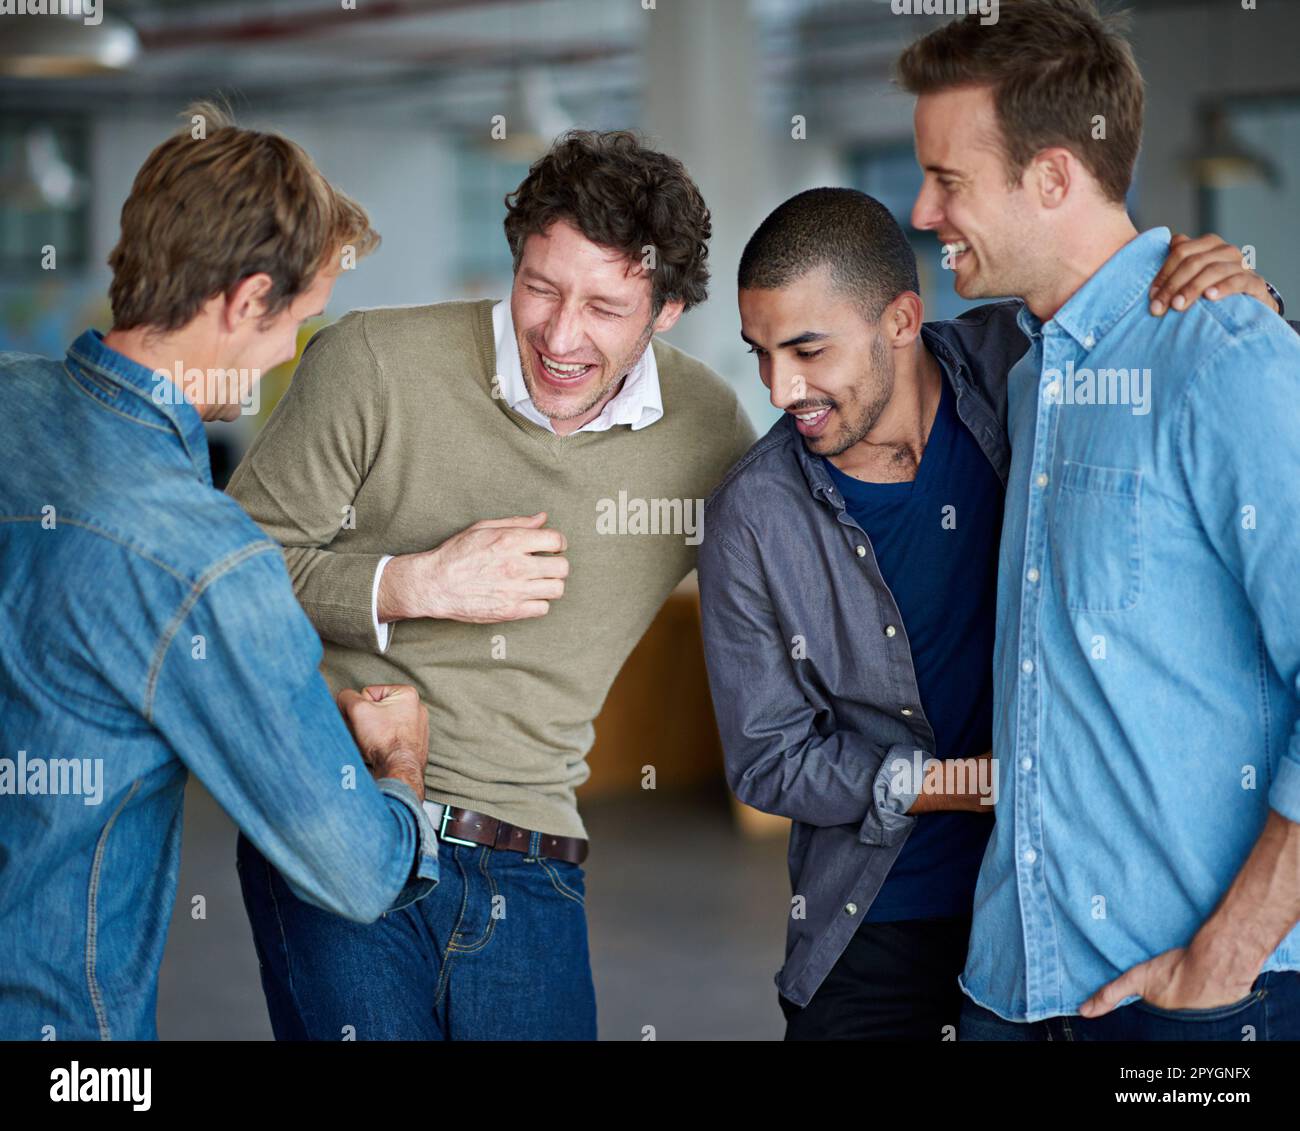 Time to test the macho. Group of male coworkers messing about and having a laugh. Stock Photo